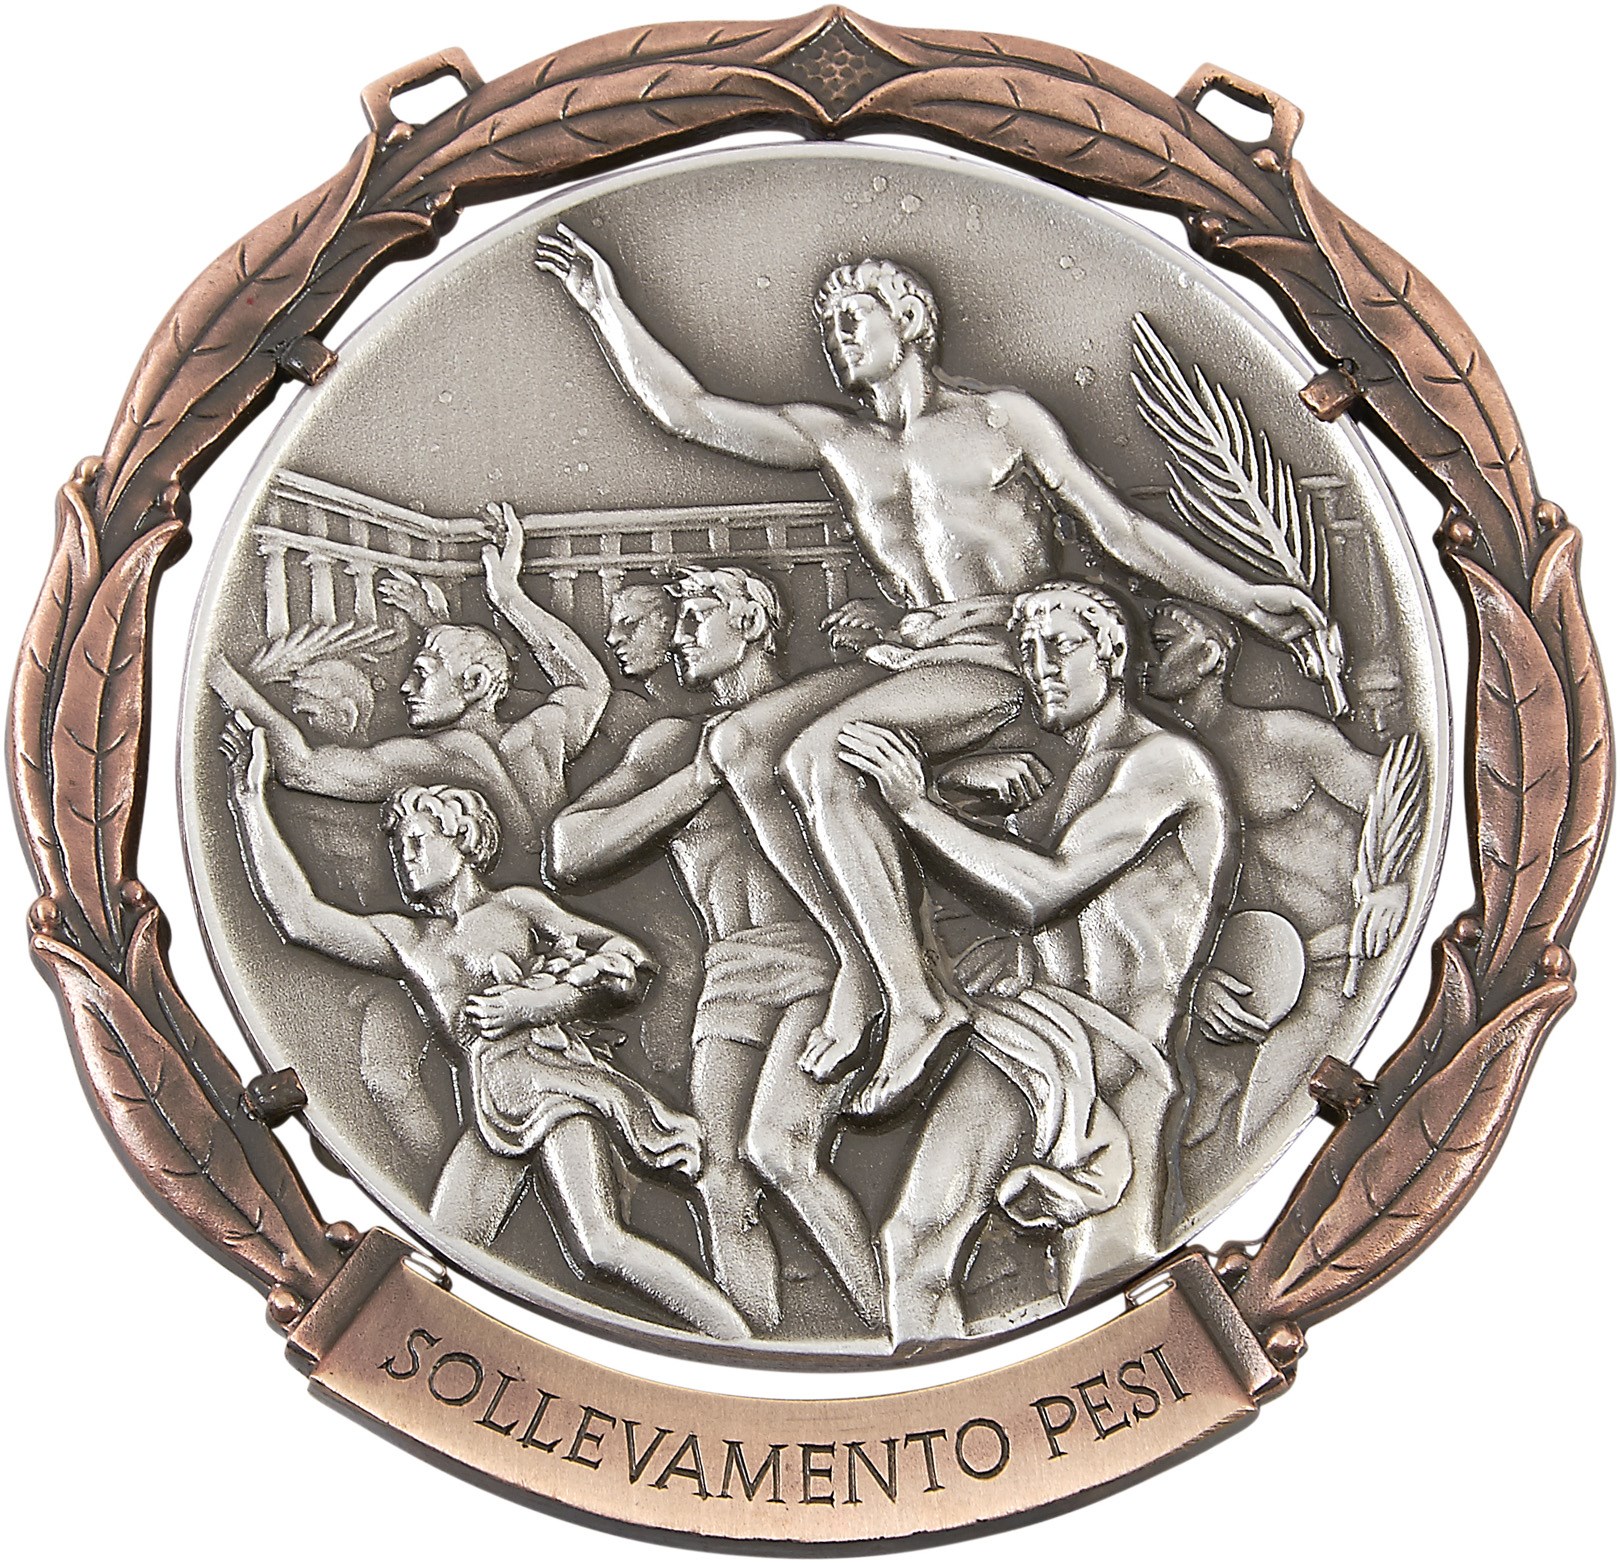 - 1960 Rome Olympics Weightlifting Silver Medal Awarded to "World's Strongest Man"